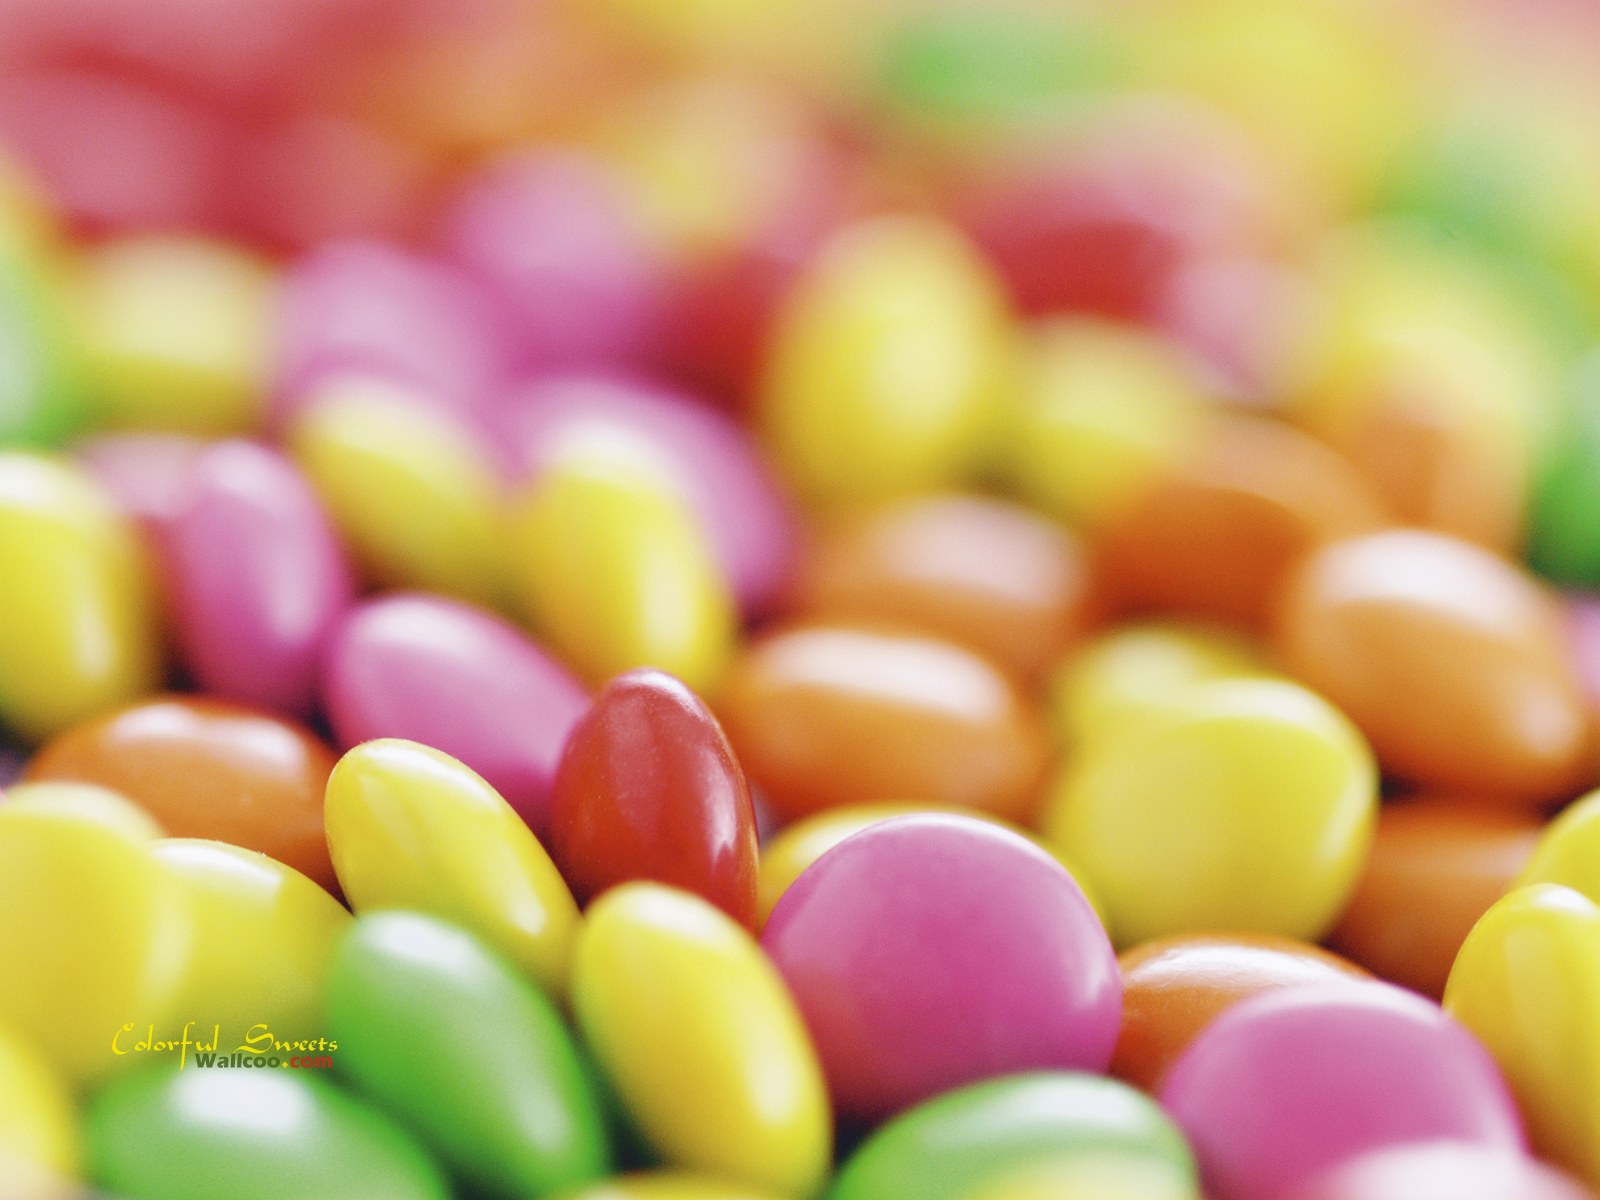 Colorful Sweets And Candies Romantic Sweet Candy No30 Hd Wallpapers